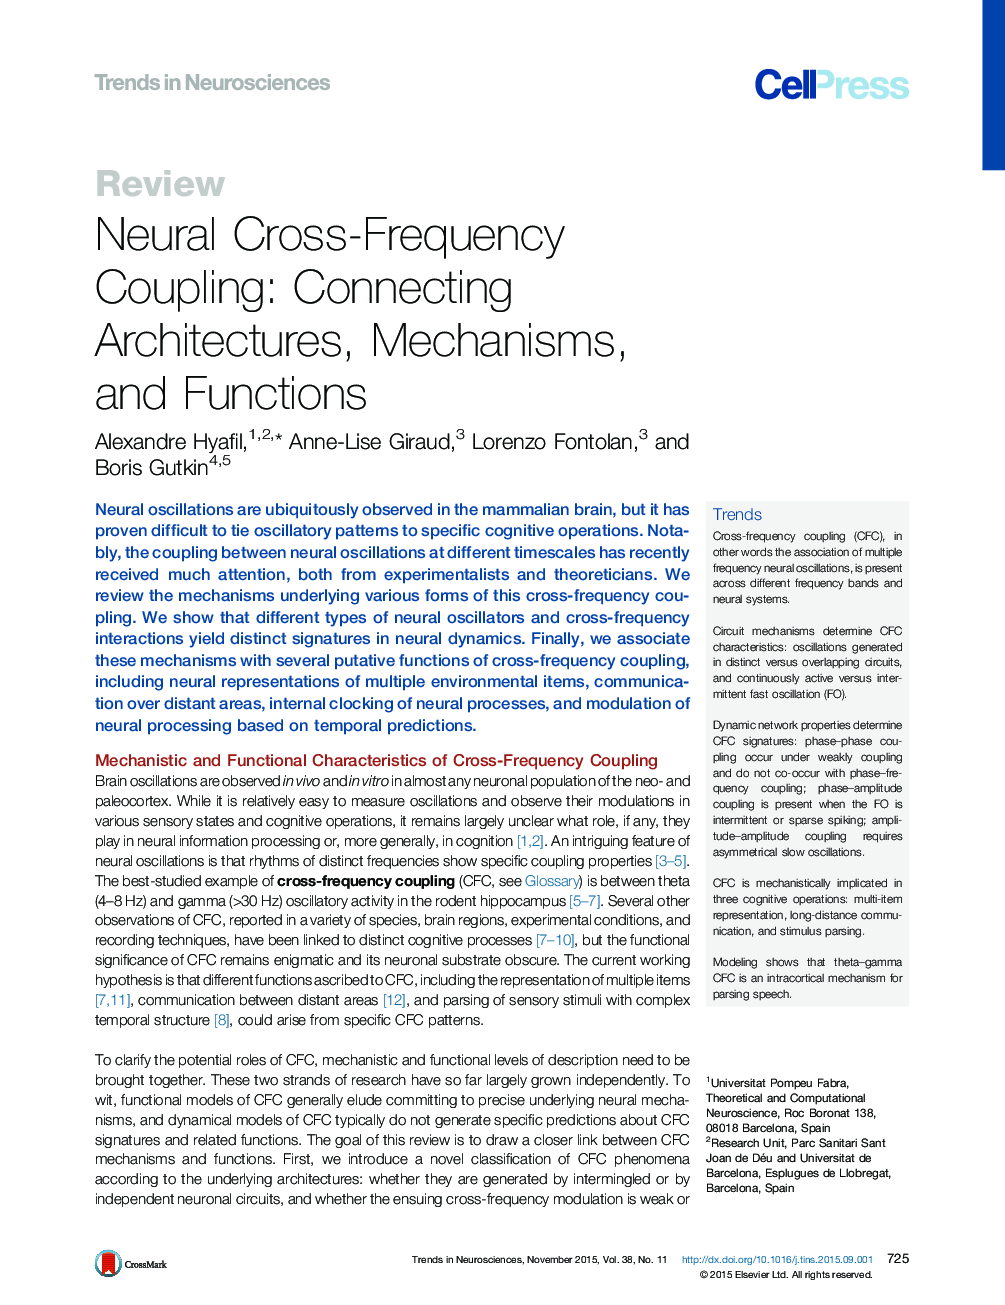 Neural Cross-Frequency Coupling: Connecting Architectures, Mechanisms, and Functions